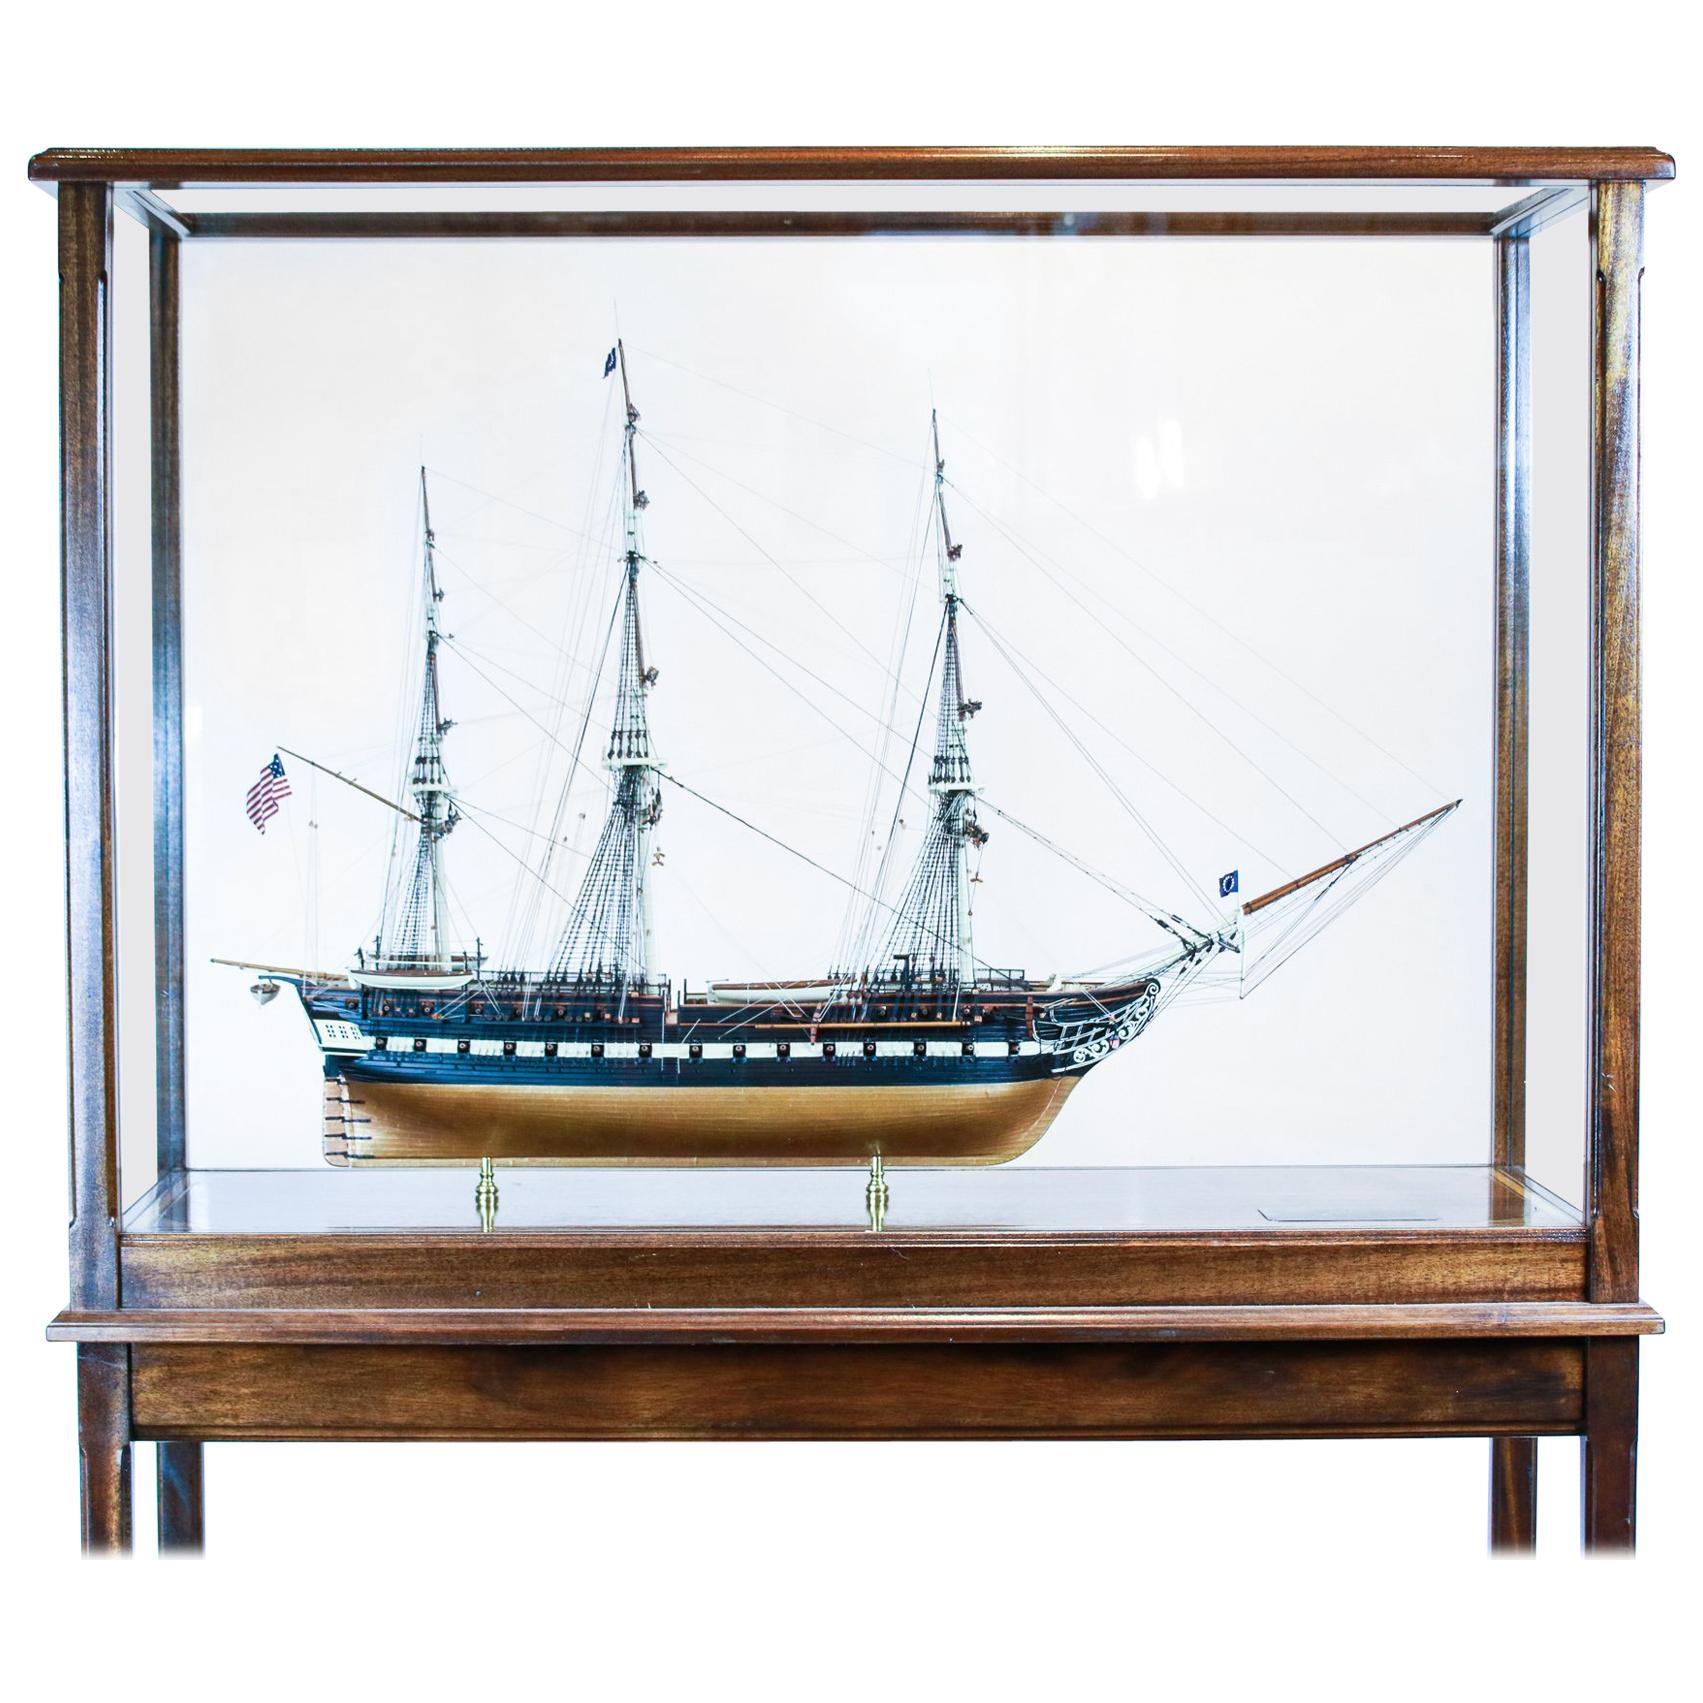 Model of the USS Constitution Old Ironsides